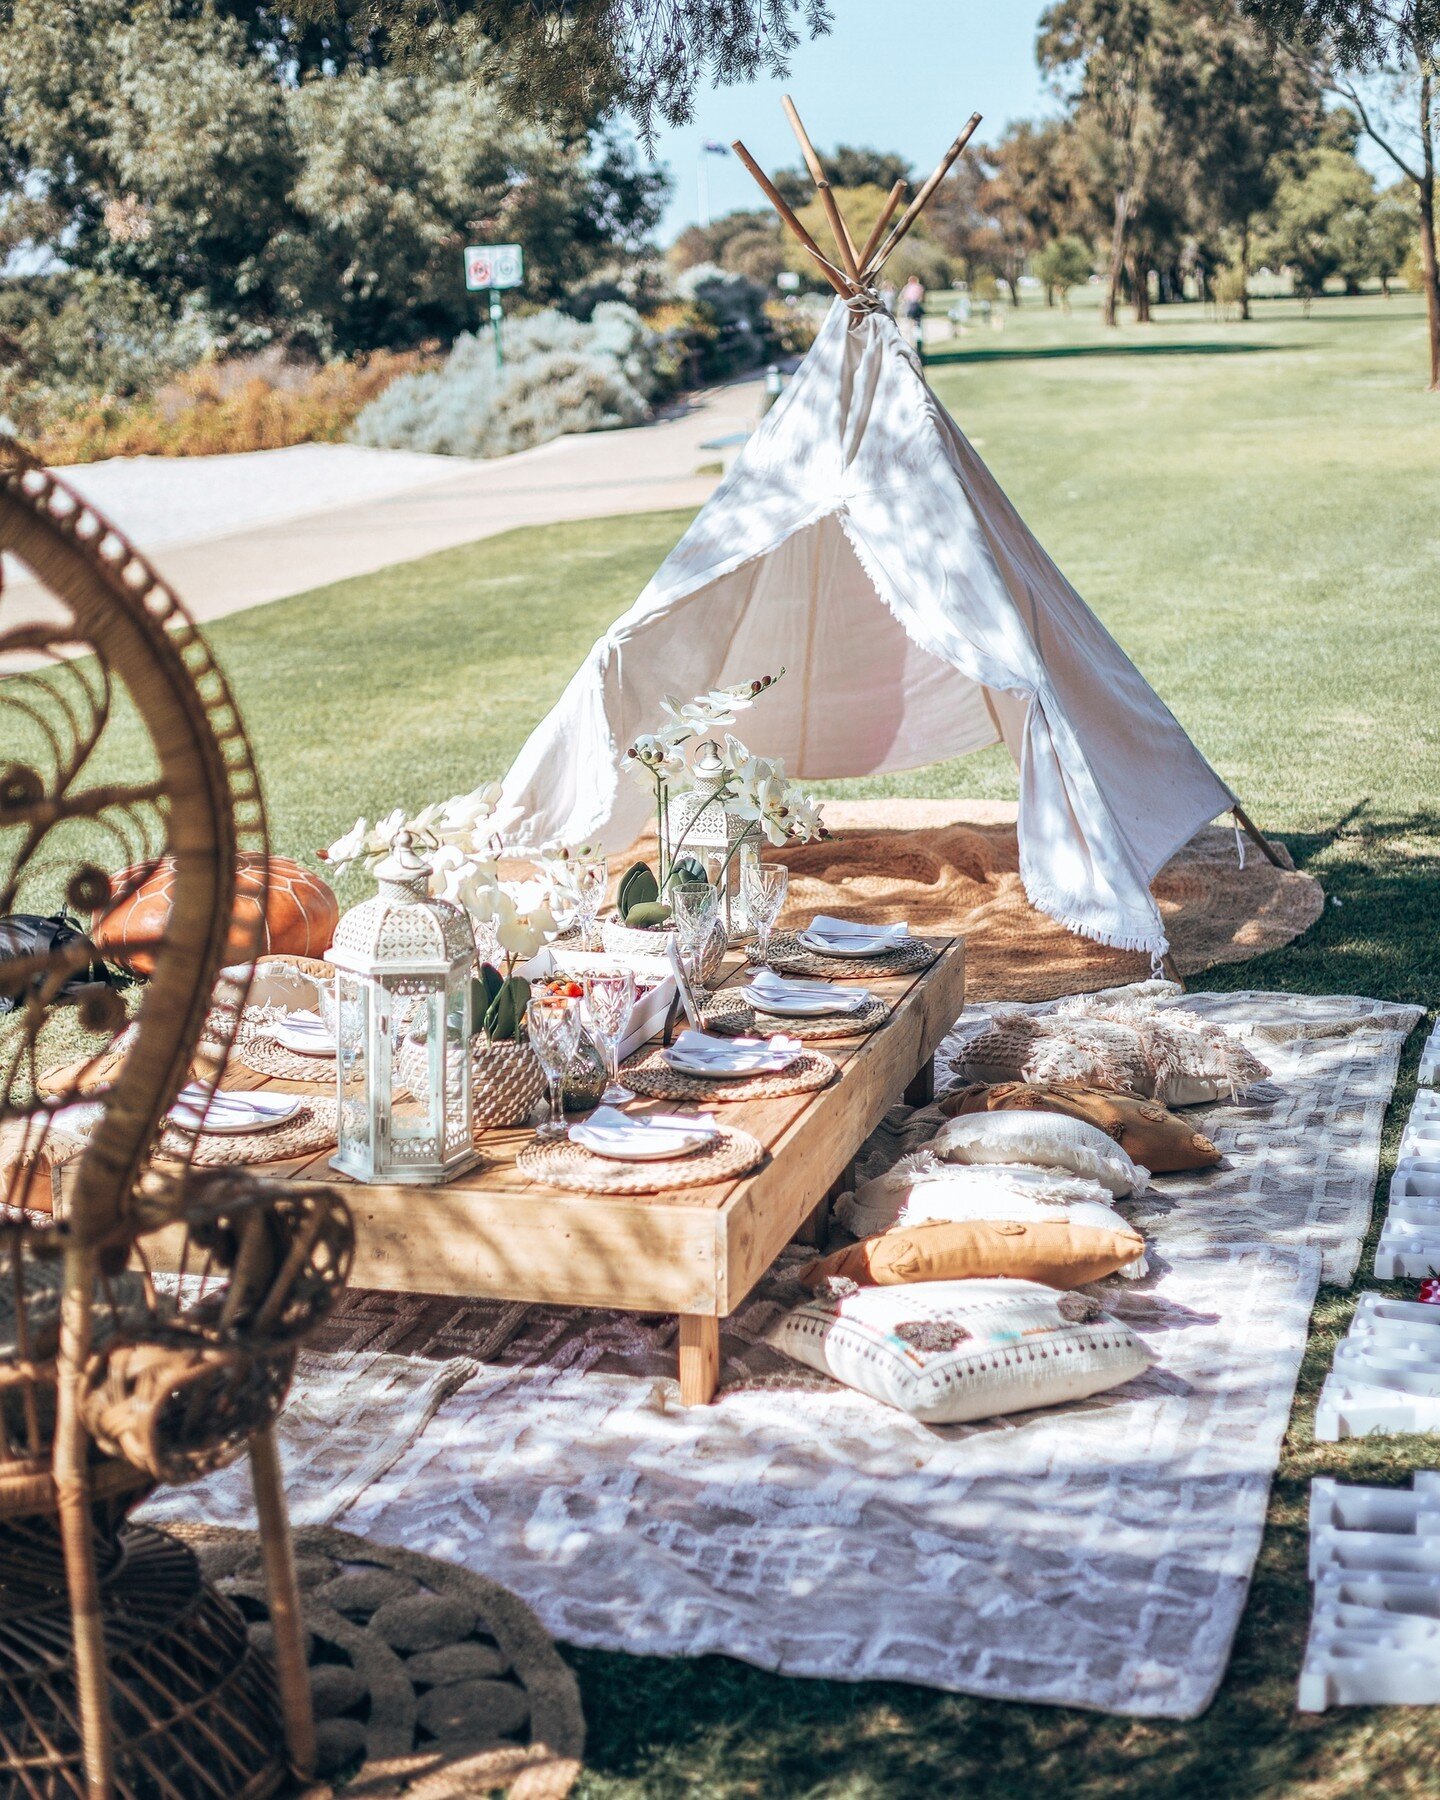 This bohemian picnic set up is perfect for family and friends who love the outdoors. With a fashionable creams, white and brown color palette, this chic set will add some fun to any outdoor adventure!